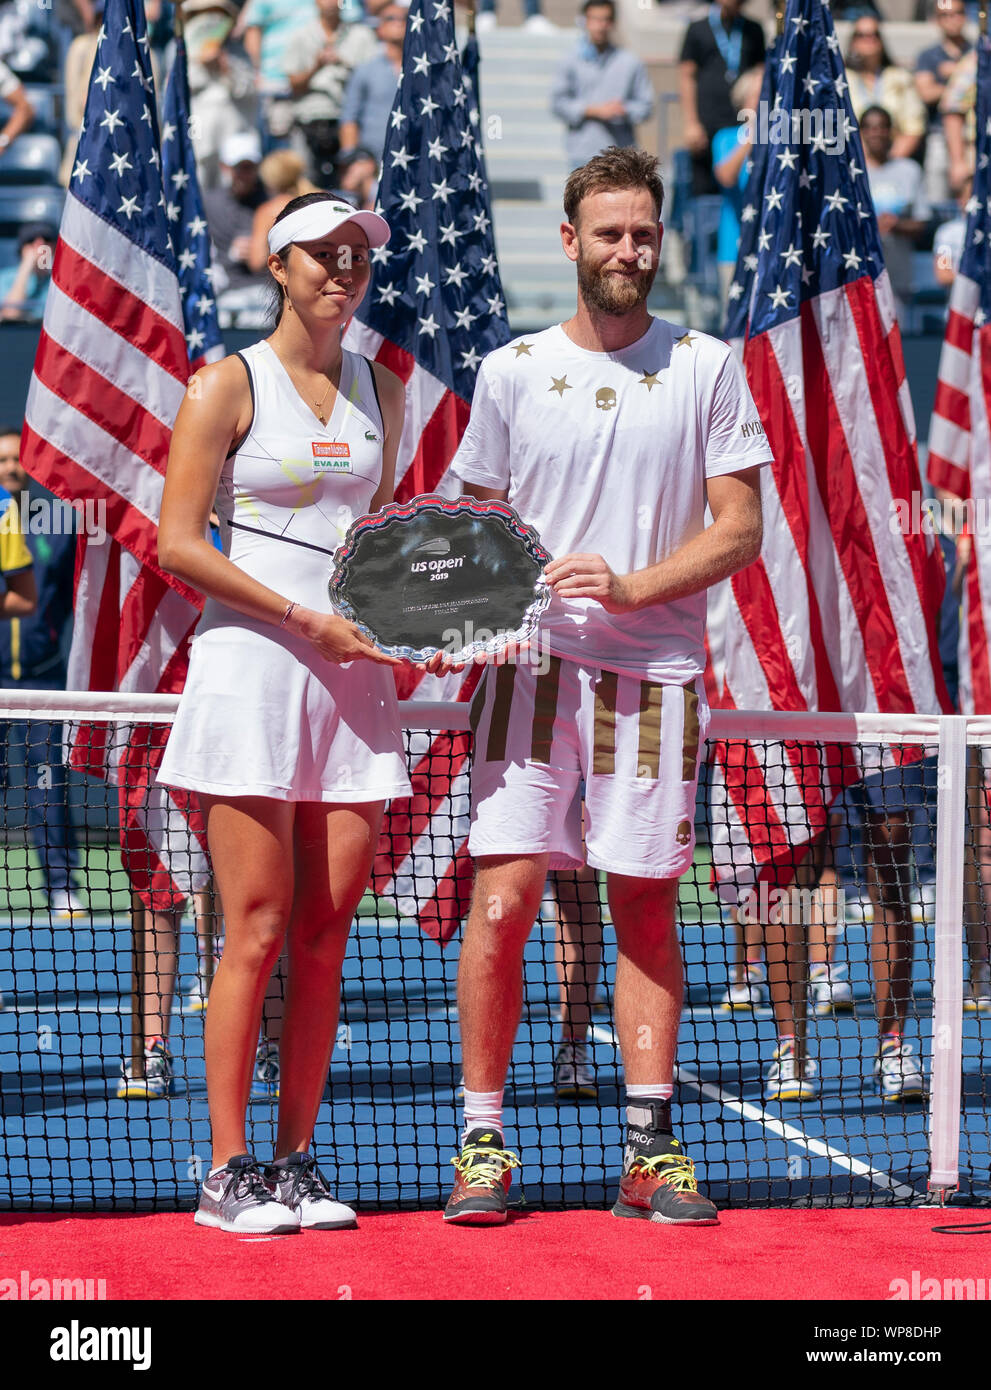 New York, NY - September 7, 2019: Hao-Ching Chan (Taipei), Michael Venus (New Zeland) pose with runner-up trophy mixed doubles final match at US Open Championships at Billie Jean King National Tennis Center Stock Photo